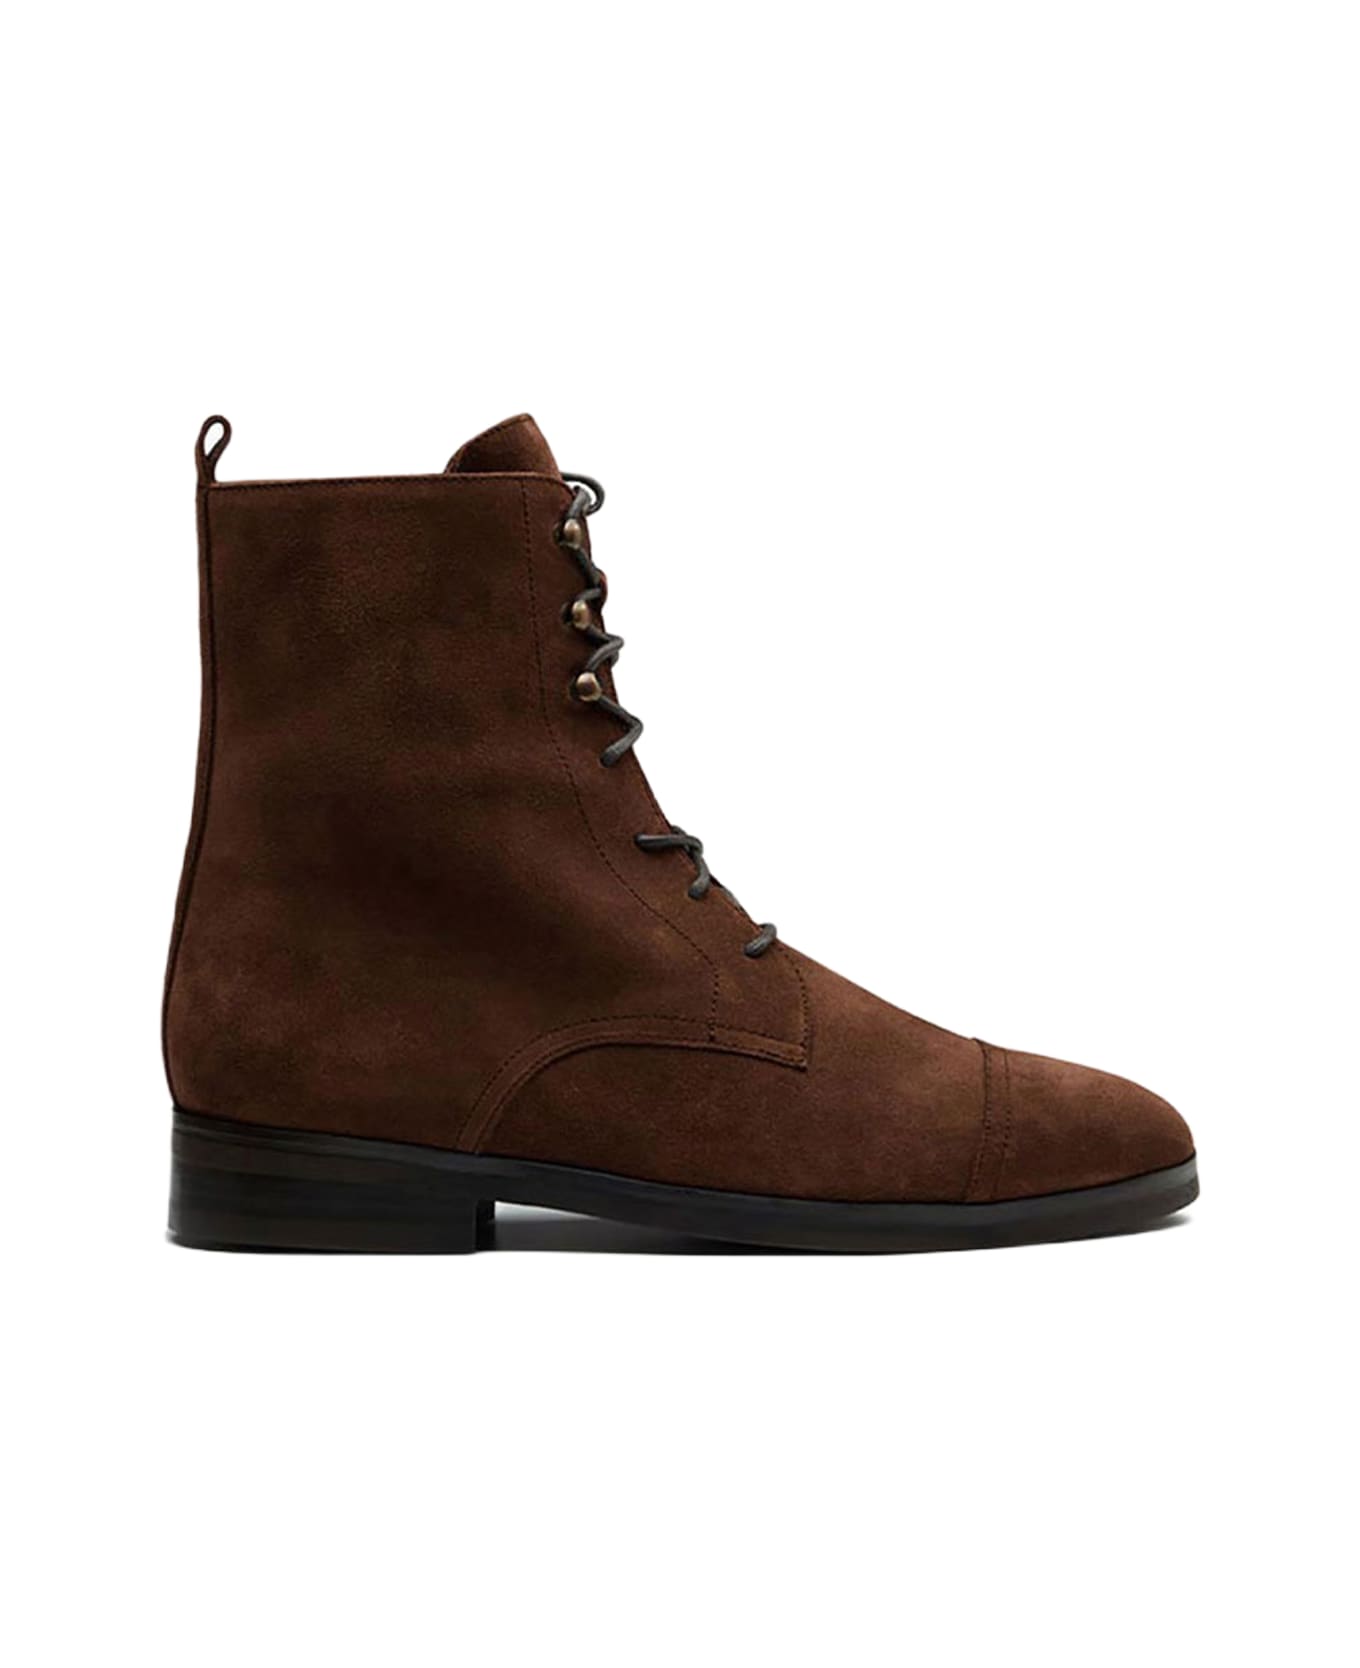 CB Made in Italy Dark Suede Boots Eva - Brown